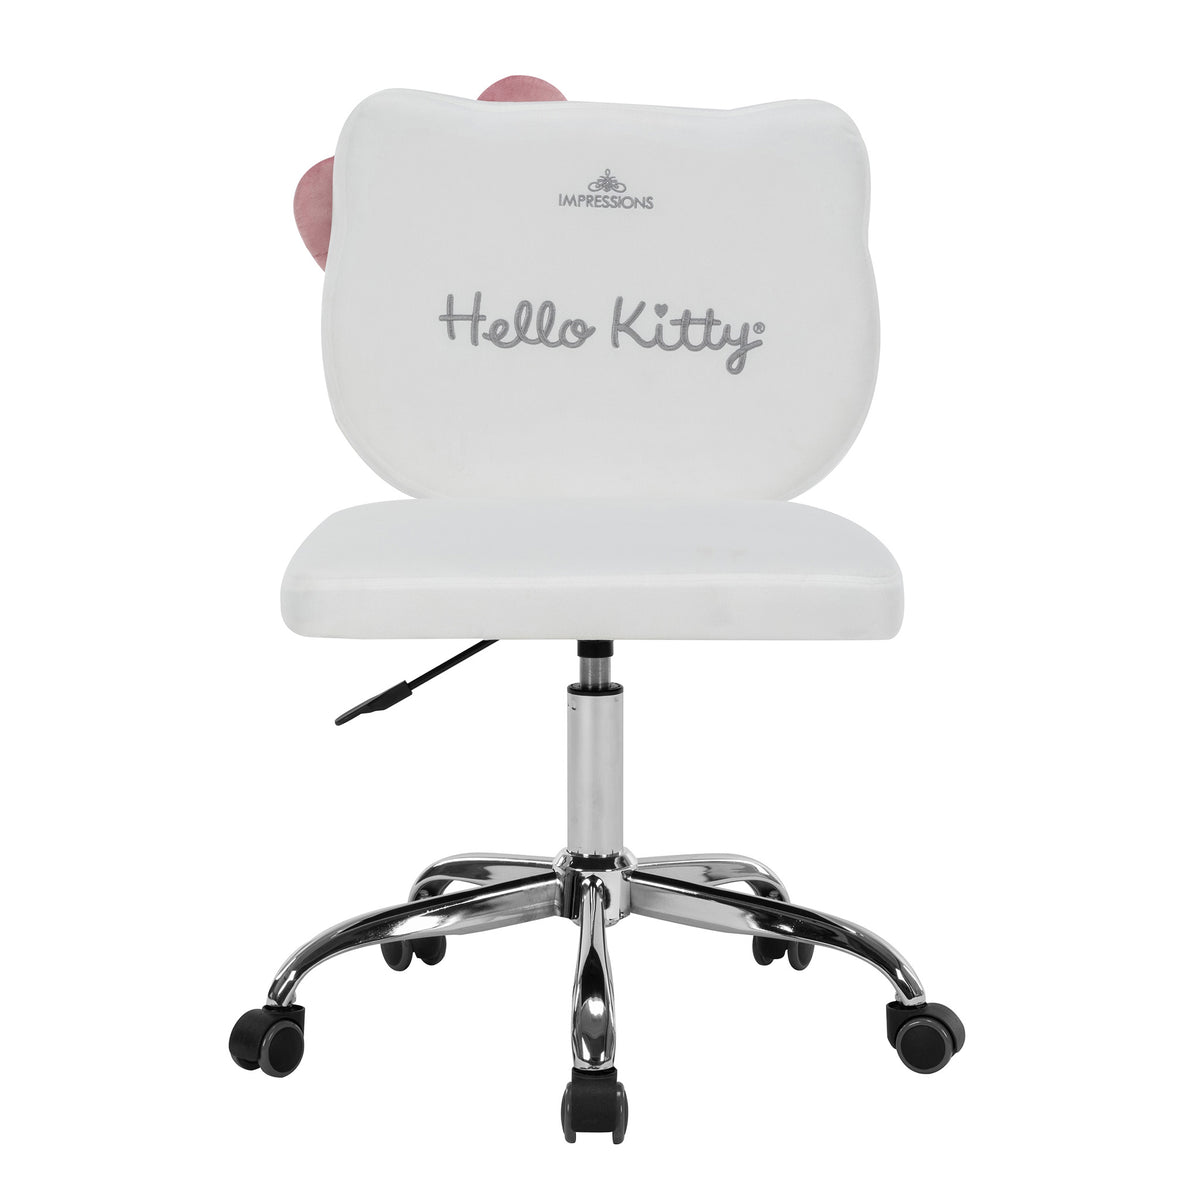 Hello Kitty on X: A supercute office space was spotted at #SanrioHQ! Is  your desk filled with #HelloKitty supplies too?  / X